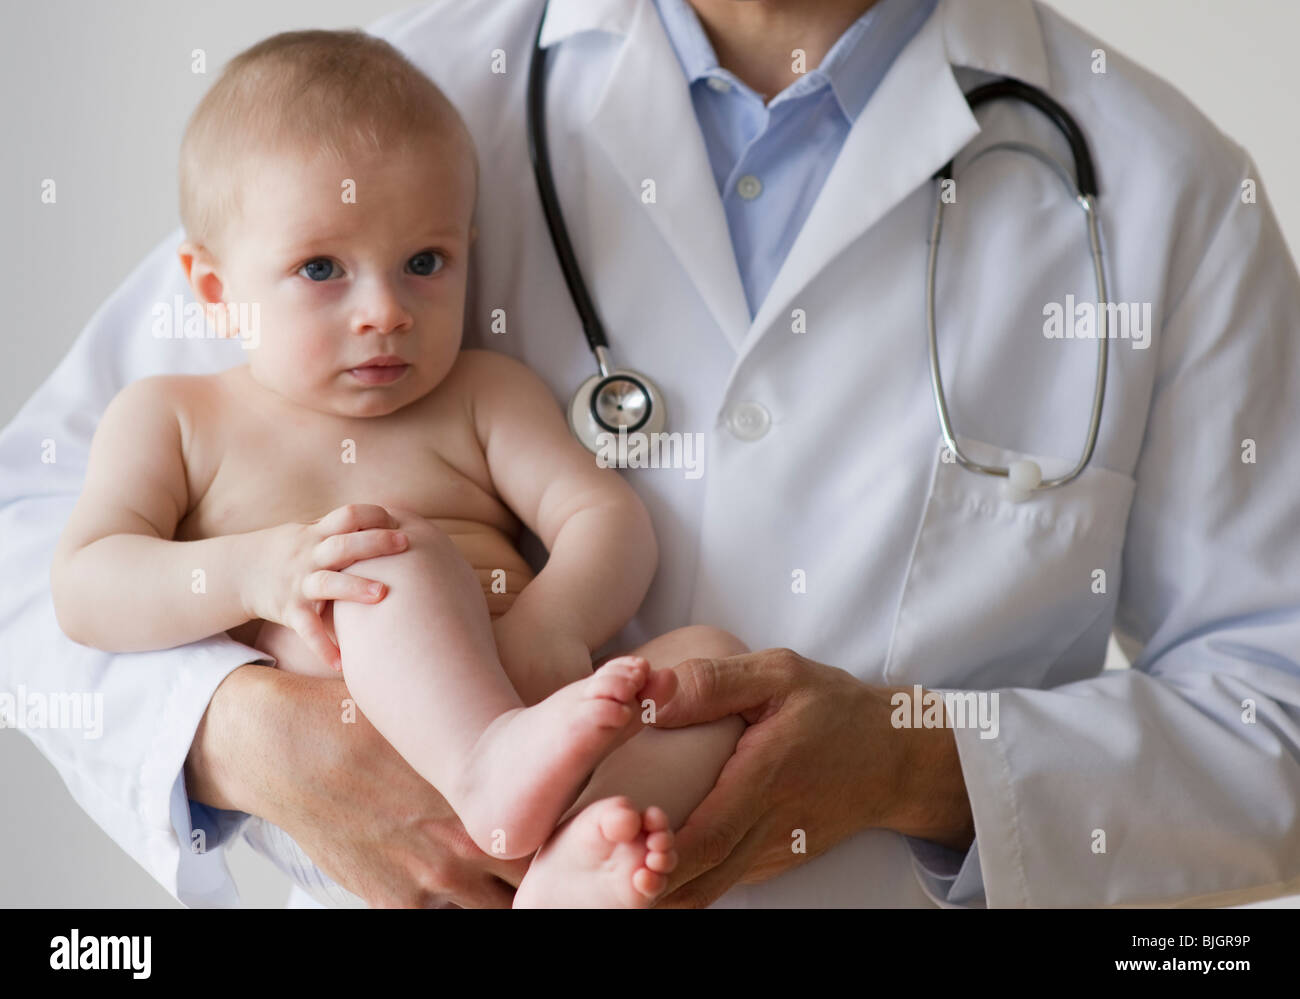 Doctor holding baby Stock Photo